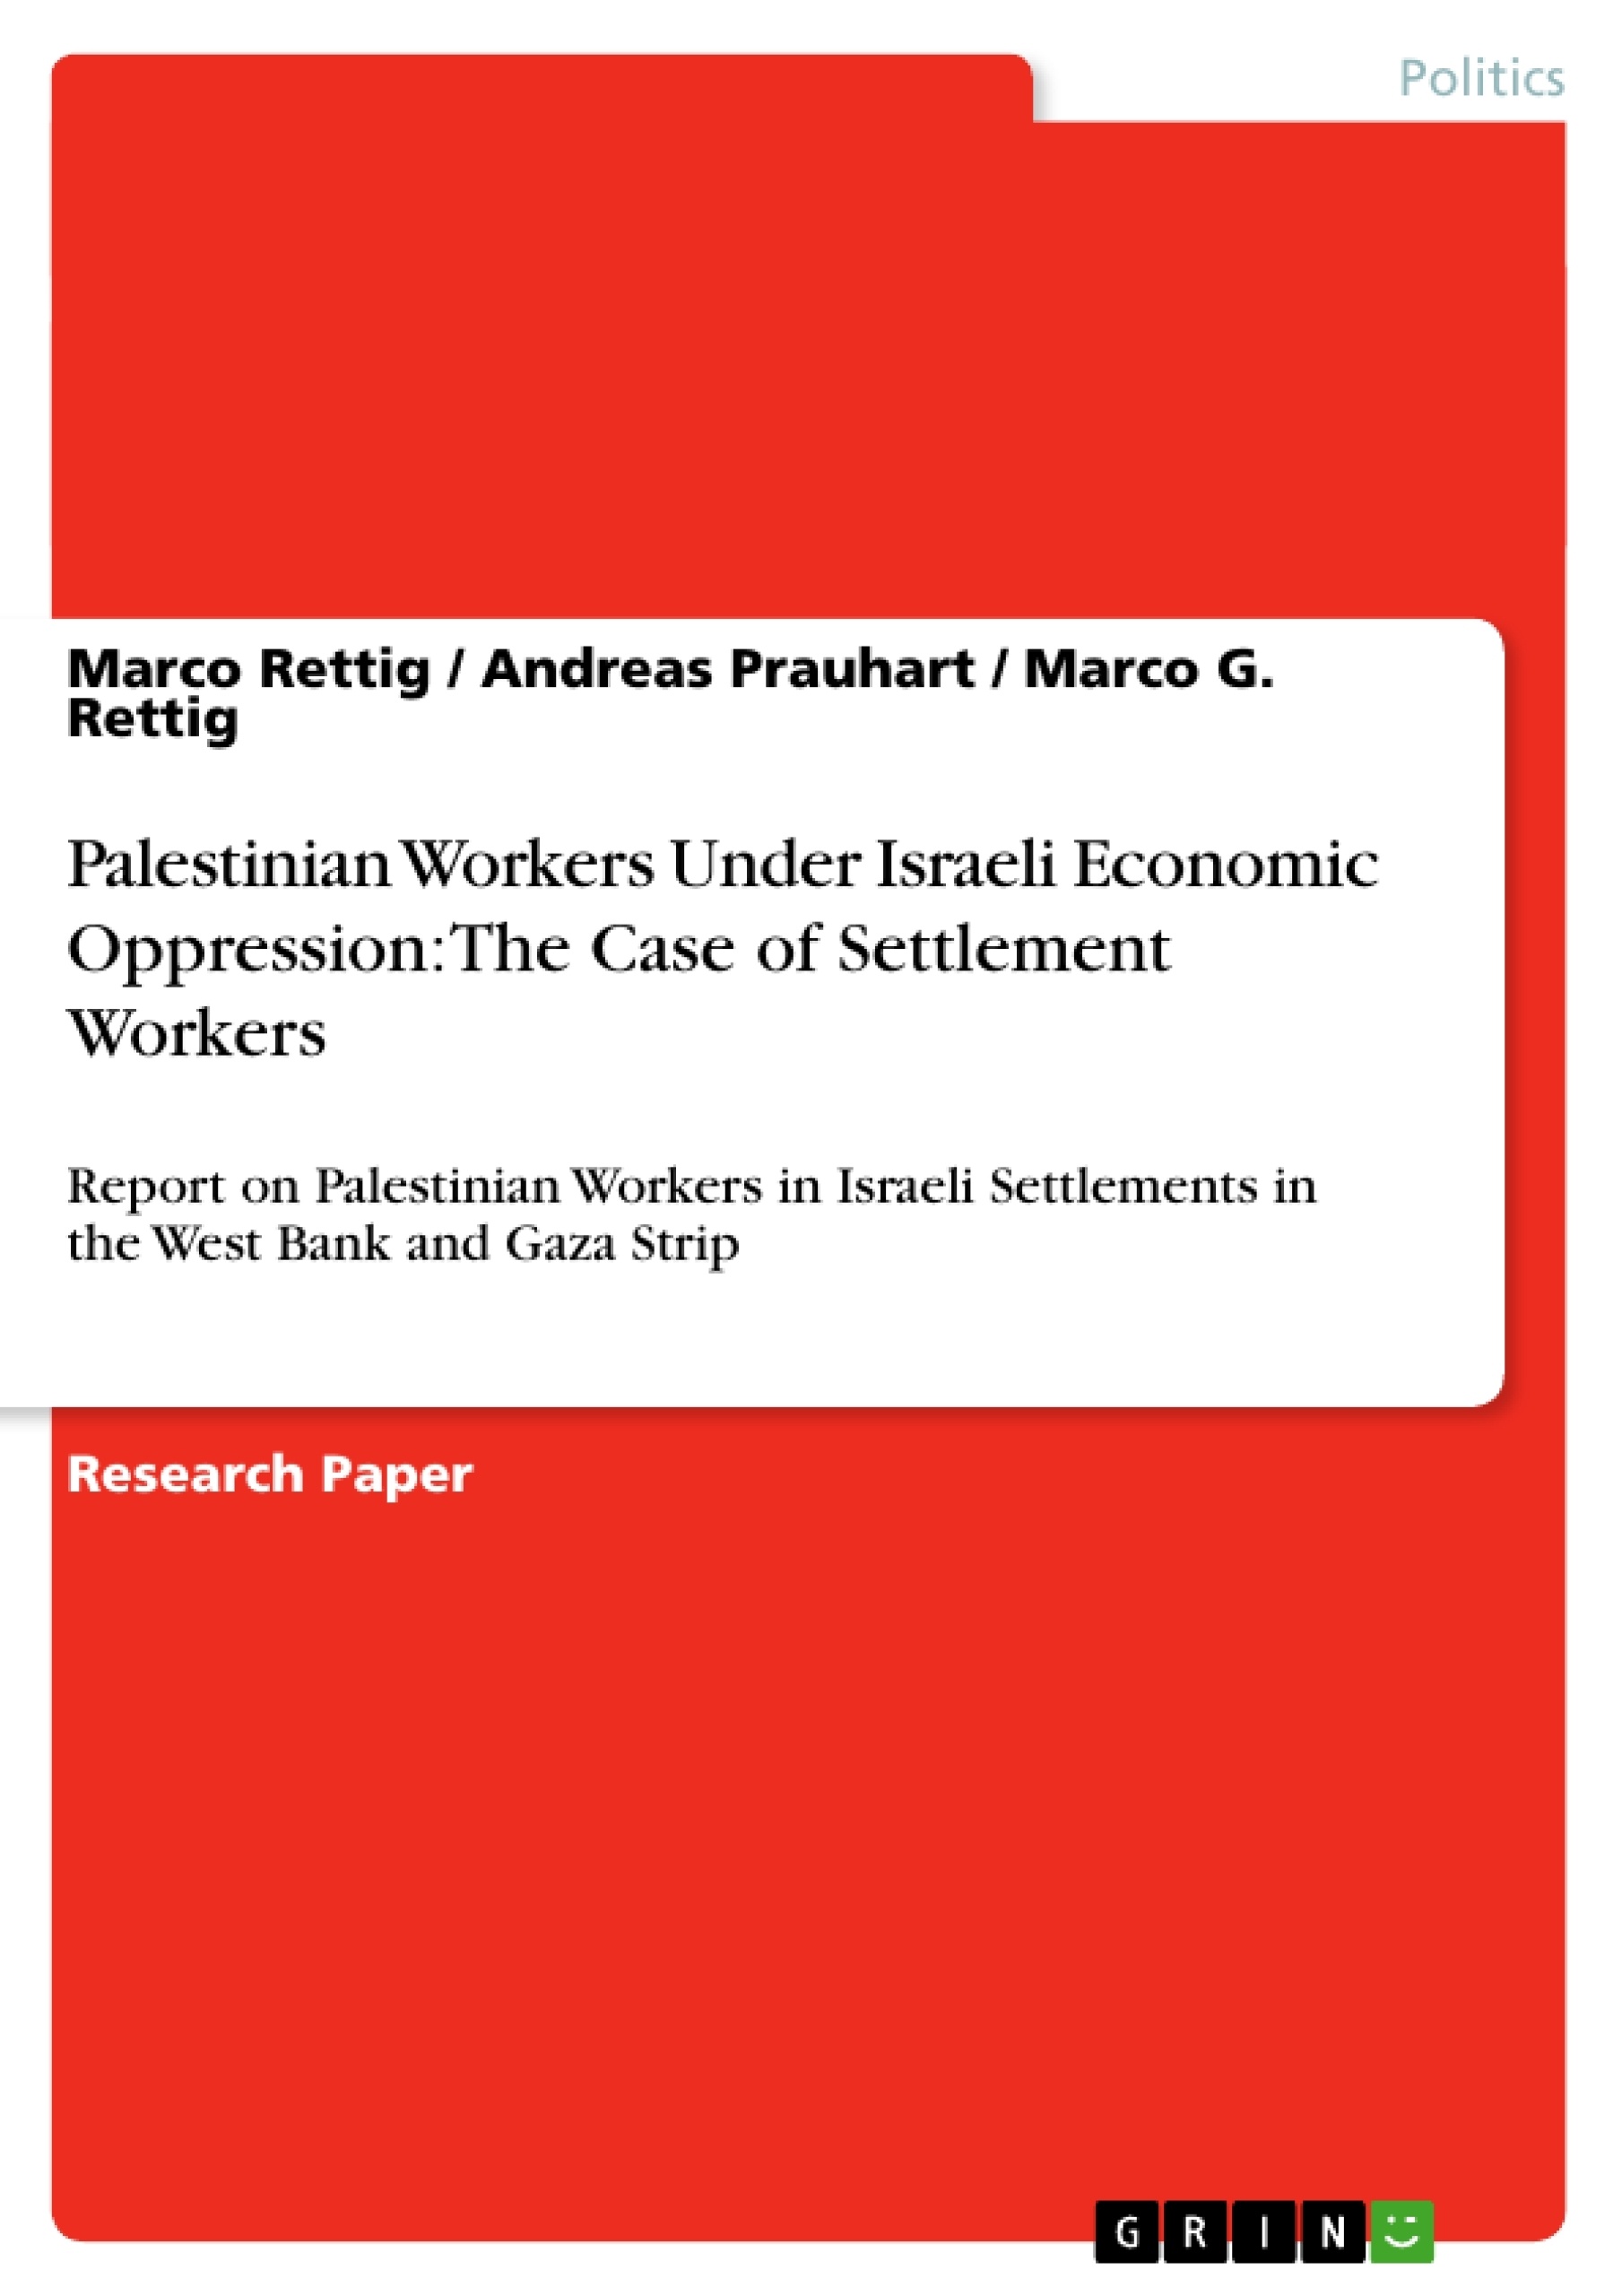 Title: Palestinian Workers Under Israeli Economic Oppression: The Case of Settlement Workers